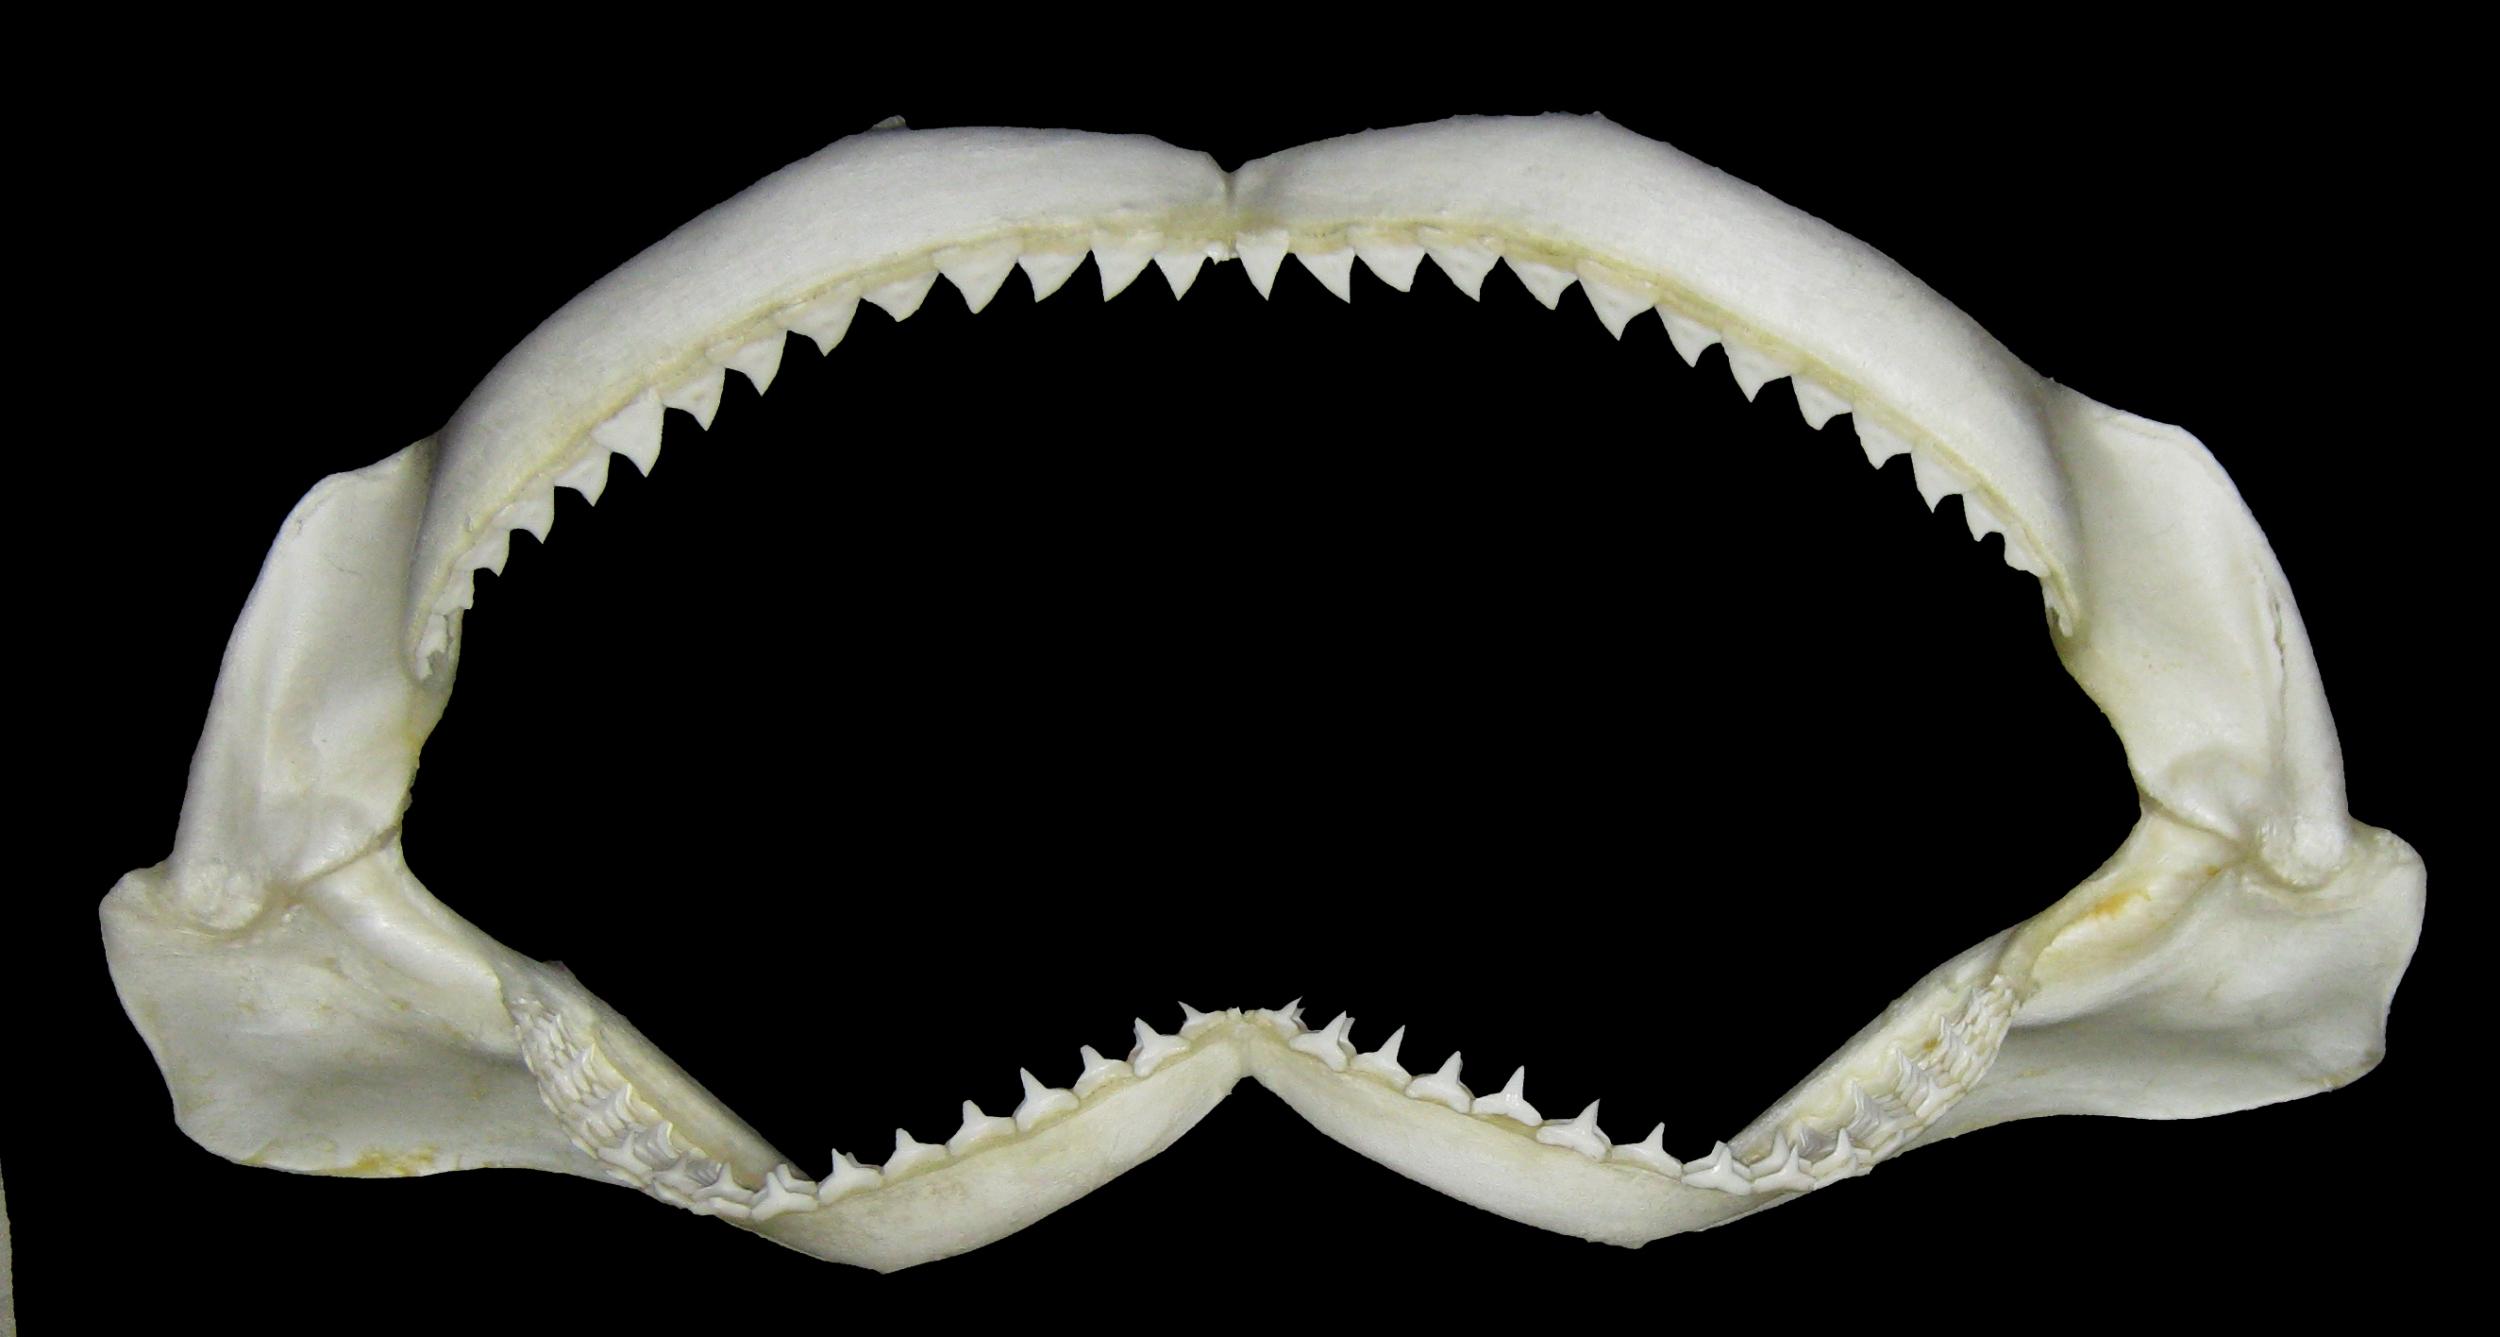 Extant Carcharhinus obscurus (Dusky Shark) jaw - General Fossil Discussion  - The Fossil Forum